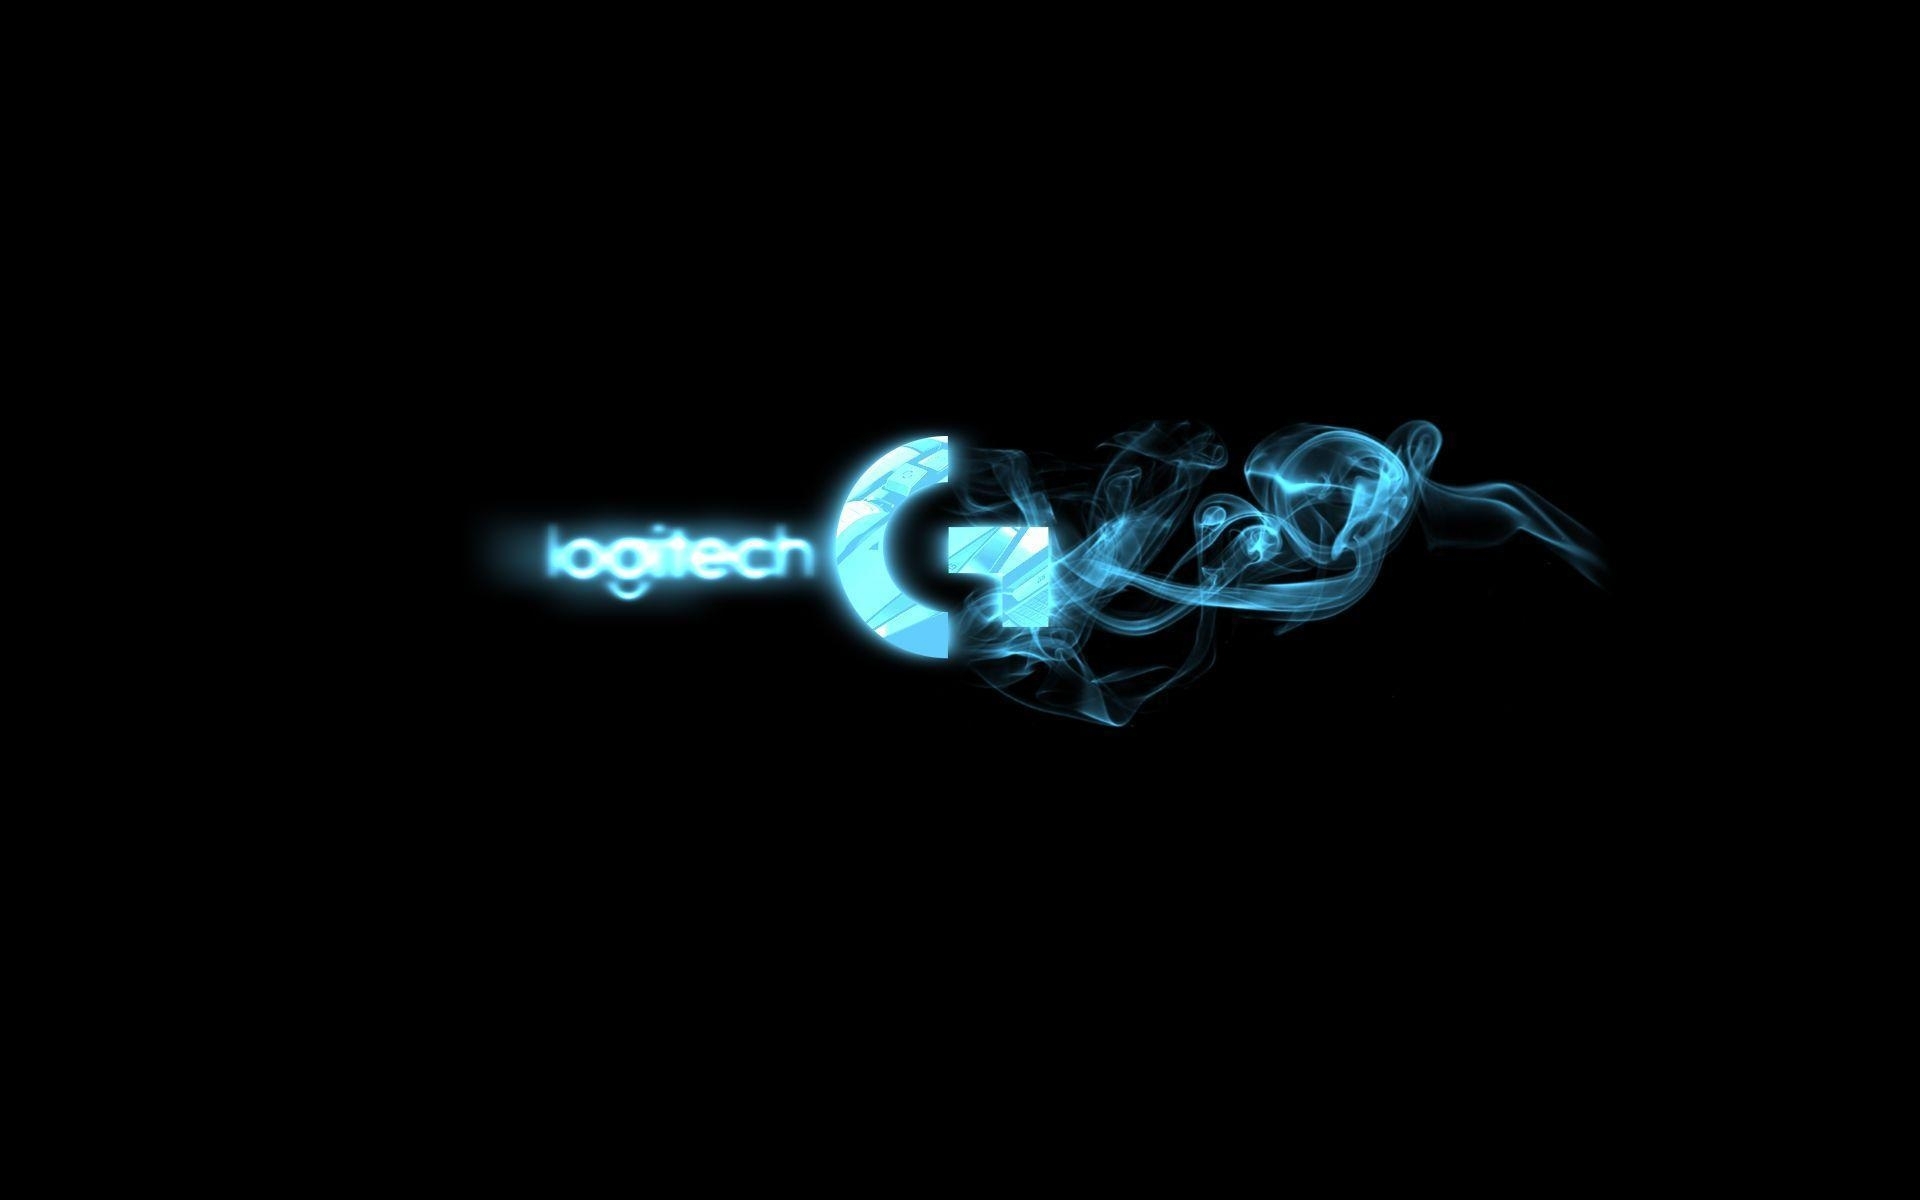 10 New Logitech Gaming Wallpaper 1920X1080 FULL HD 1920×1080 For PC Background